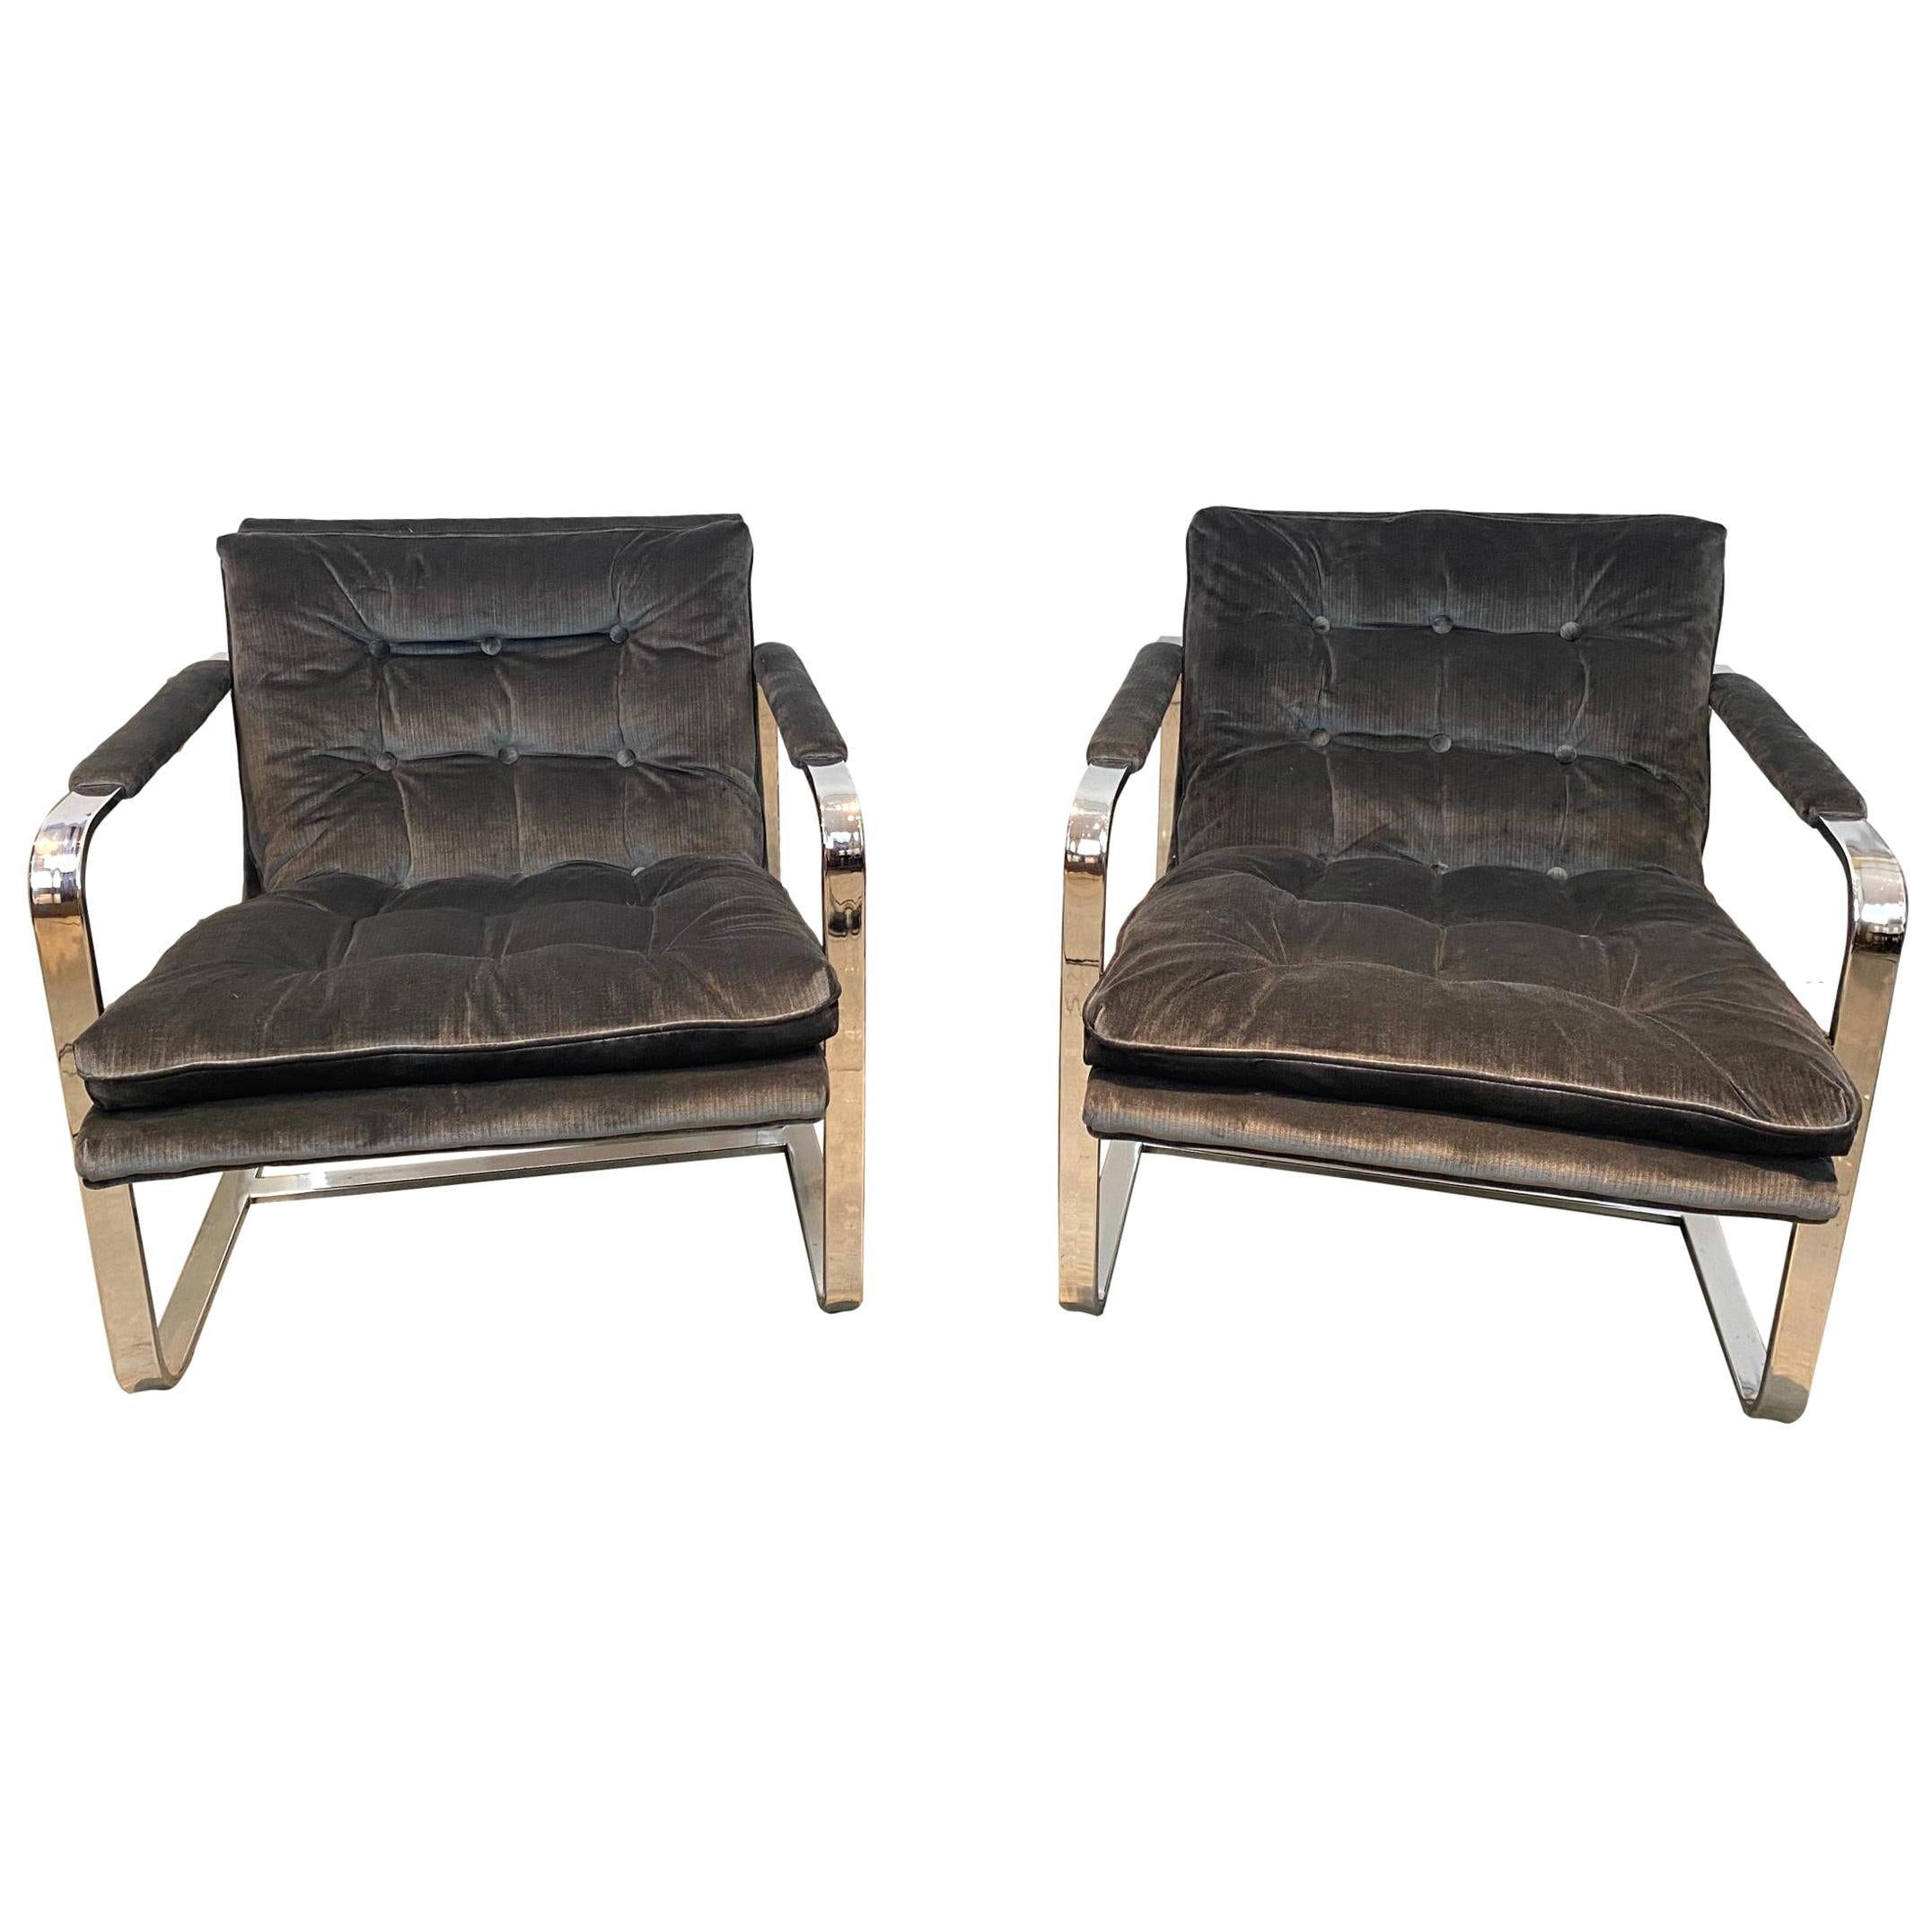 Pair of Midcentury Chrome Lounge Chairs, circa 1970, New Scalamandré Upholstery